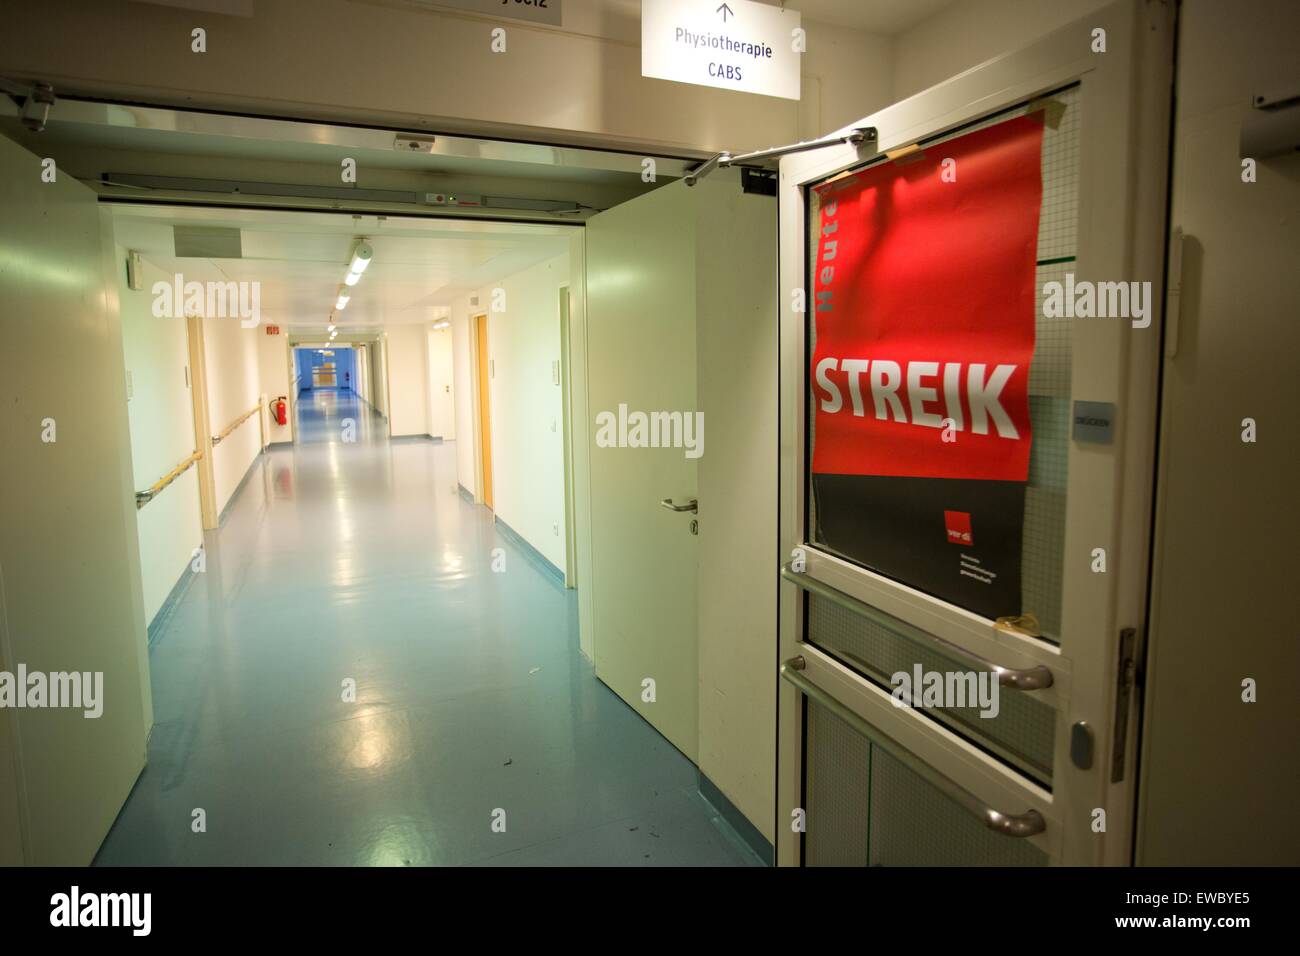 Berlin, Germany. 22nd June, 2015. Deserted hallways are pictured during an indefinite strike of nurses at the Charite hospital in Berlin, Germany, 22 June 2015. The employees are demanding improved work conditions. Photo: Joerg Carstensen/dpa/Alamy Live News Stock Photo